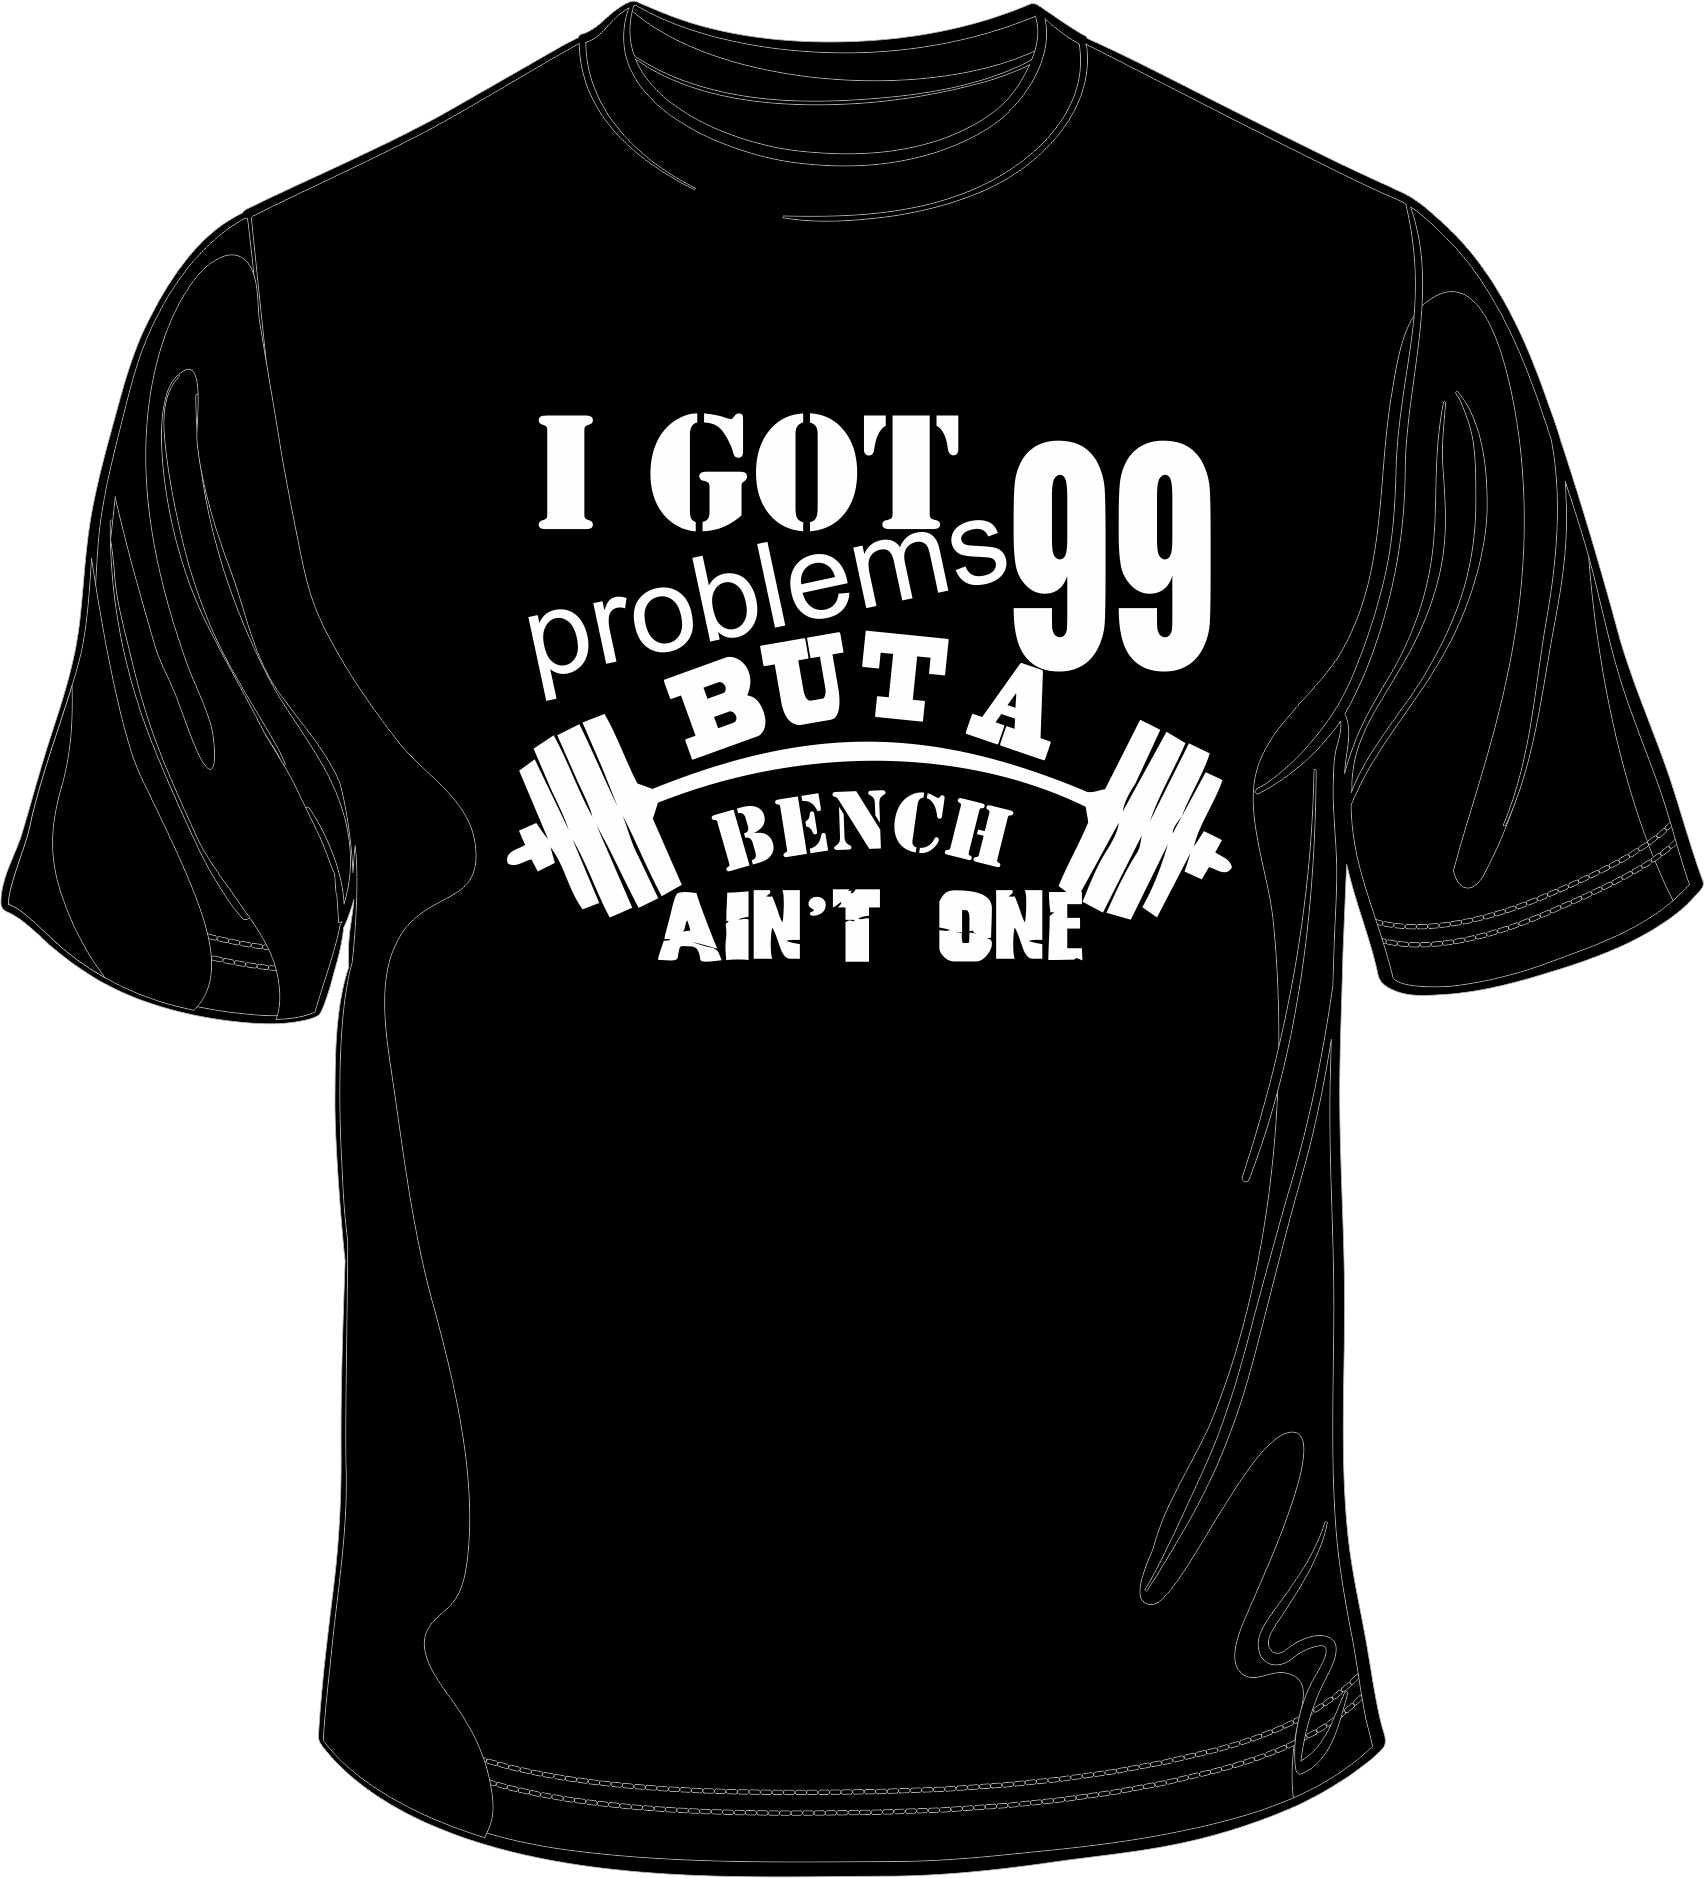 I got 99 problems but a Bench ain't one - Gym Printed T-Shirt/Vest